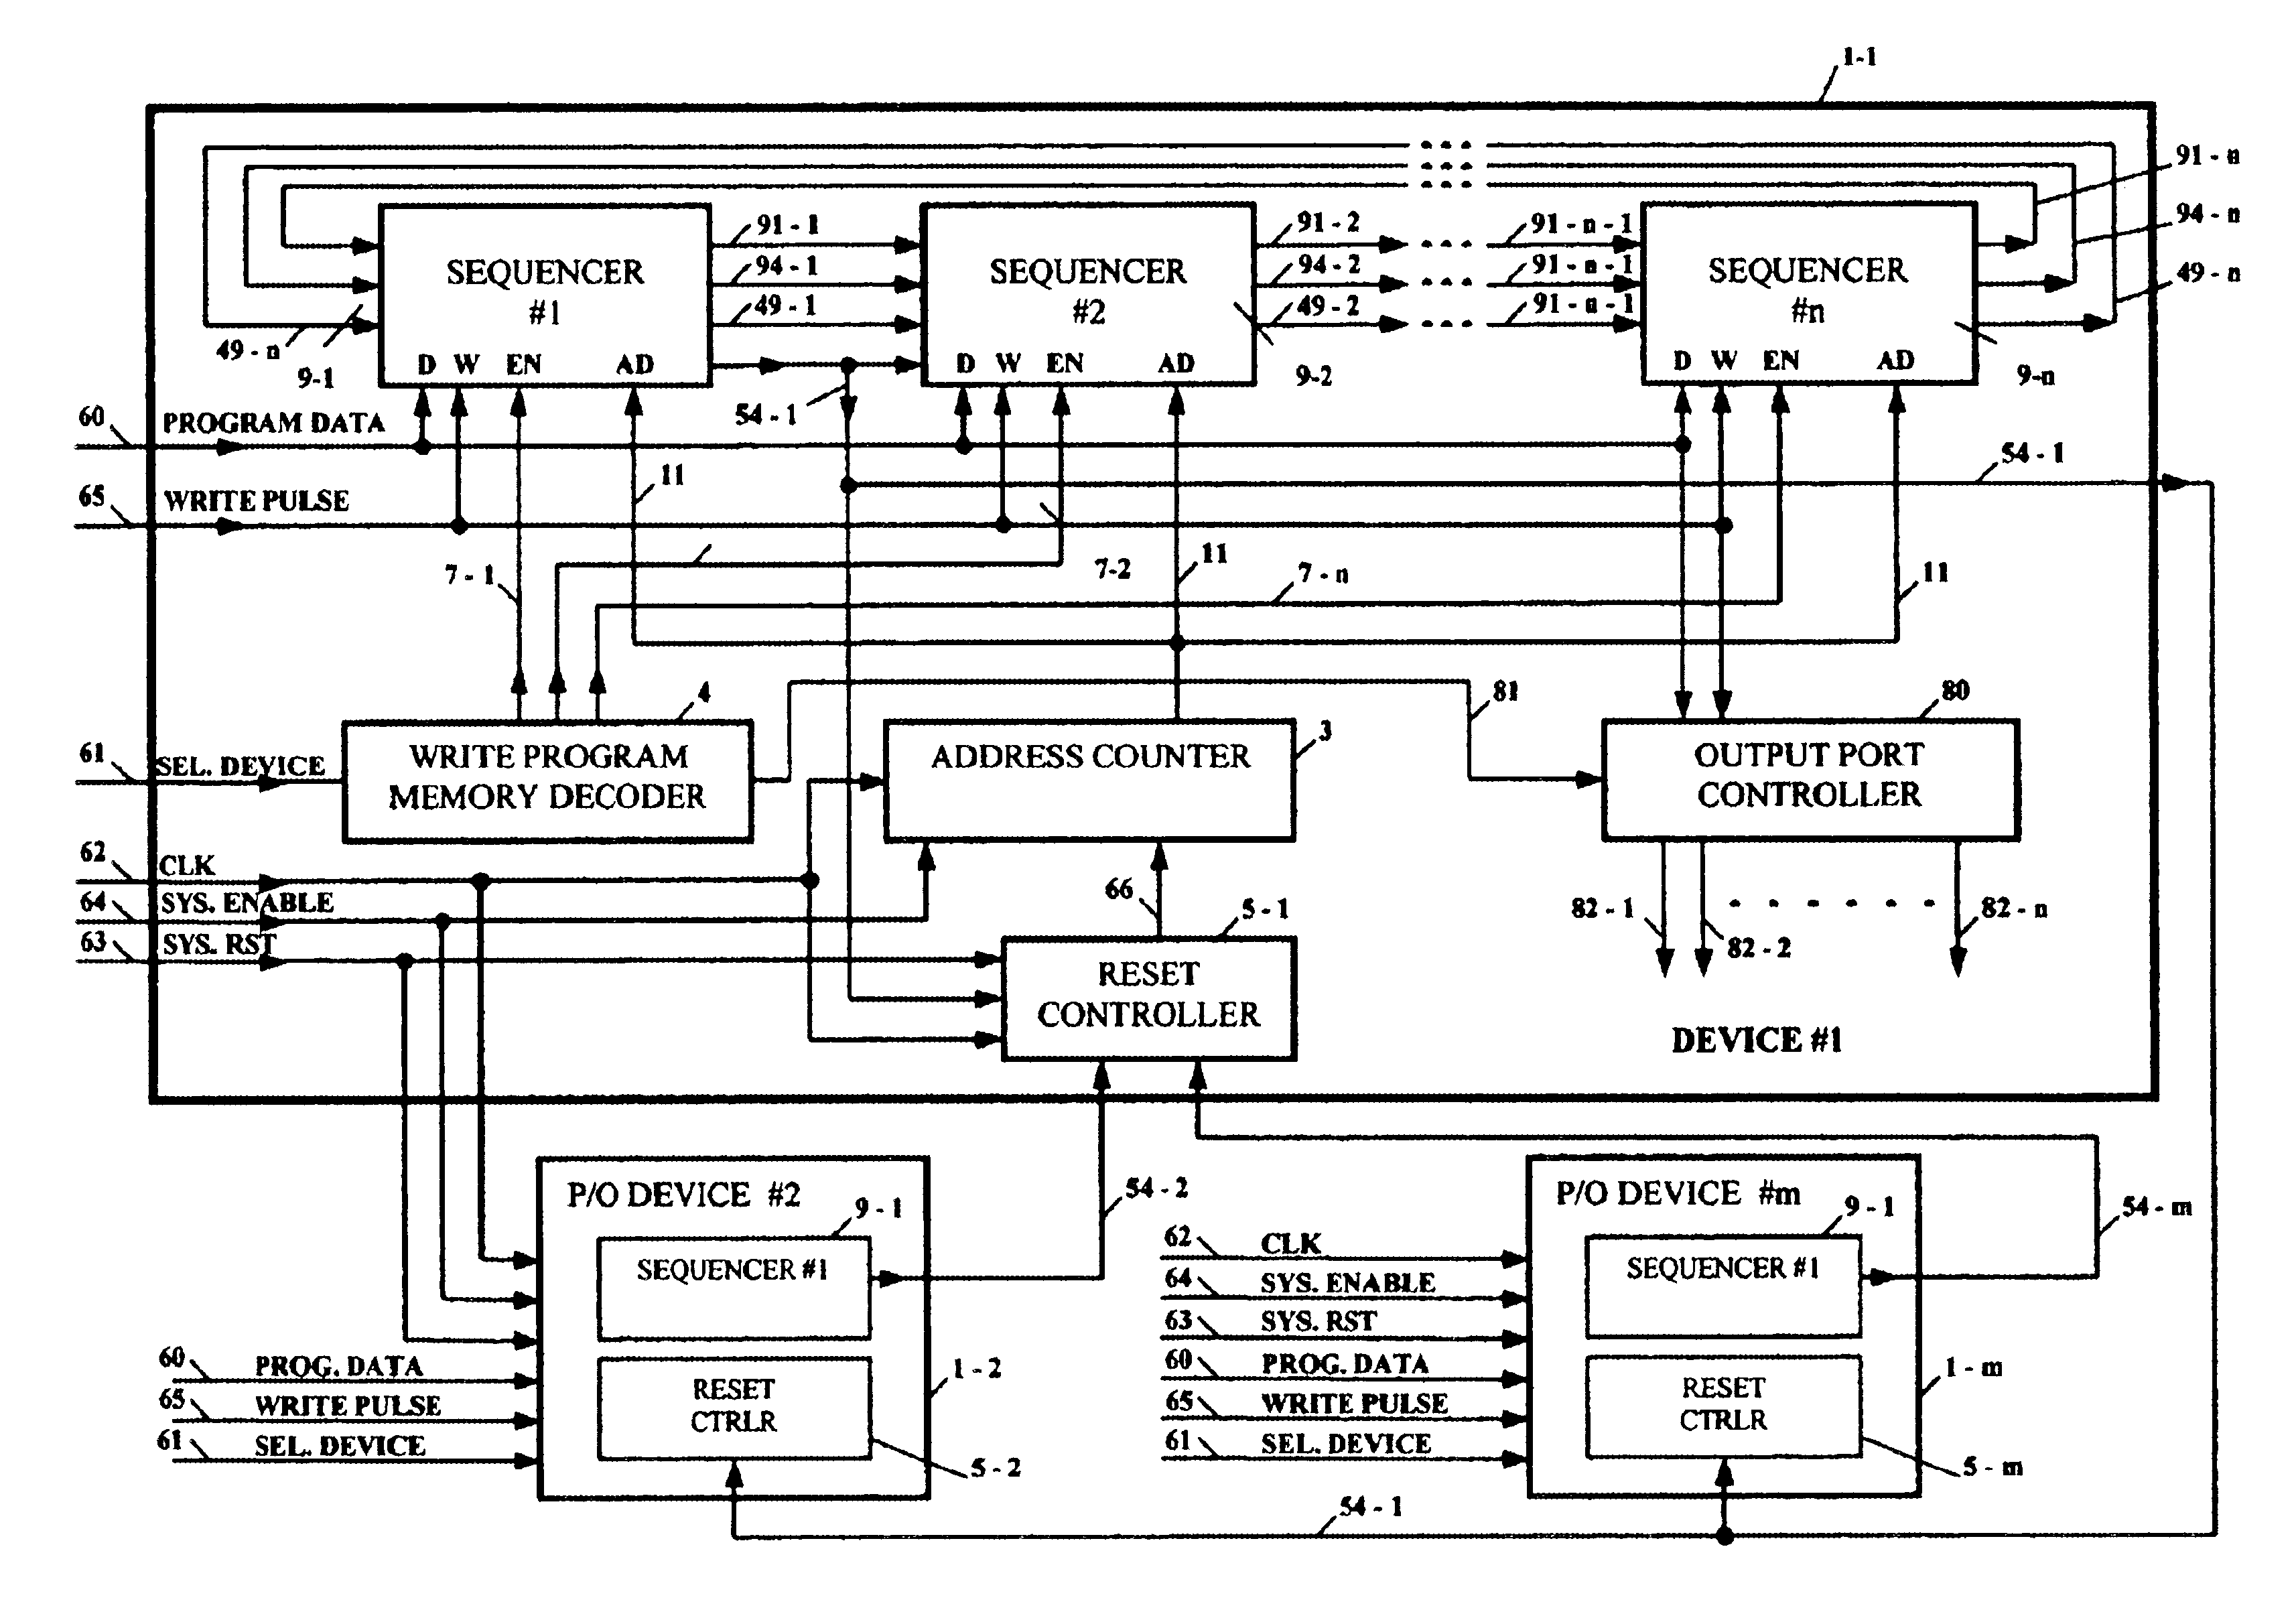 Compiler synchronized multi-processor programmable logic device with direct transfer of computation results among processors